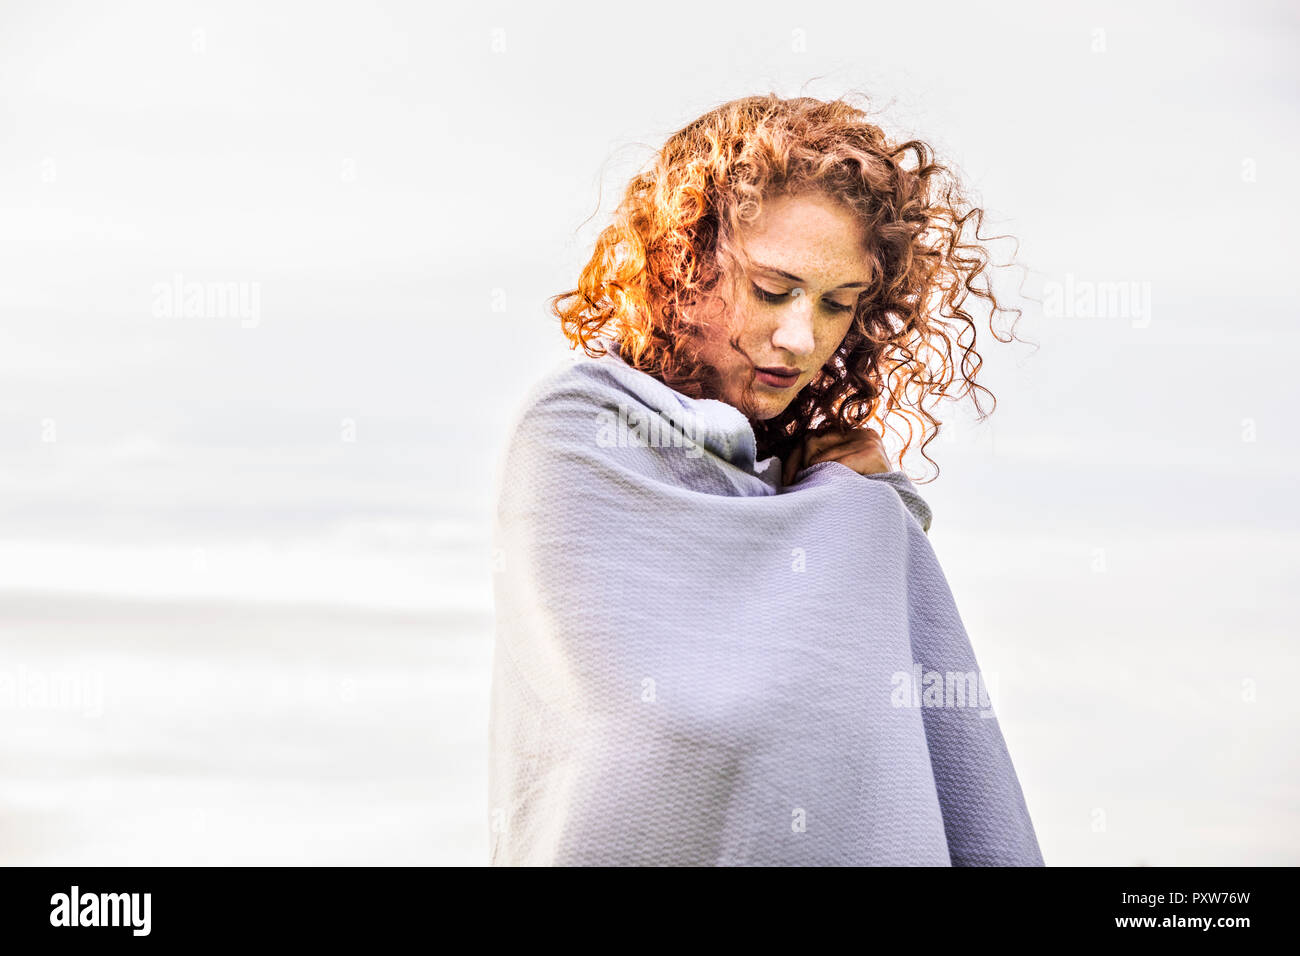 Portrait of redheaded young woman Stock Photo